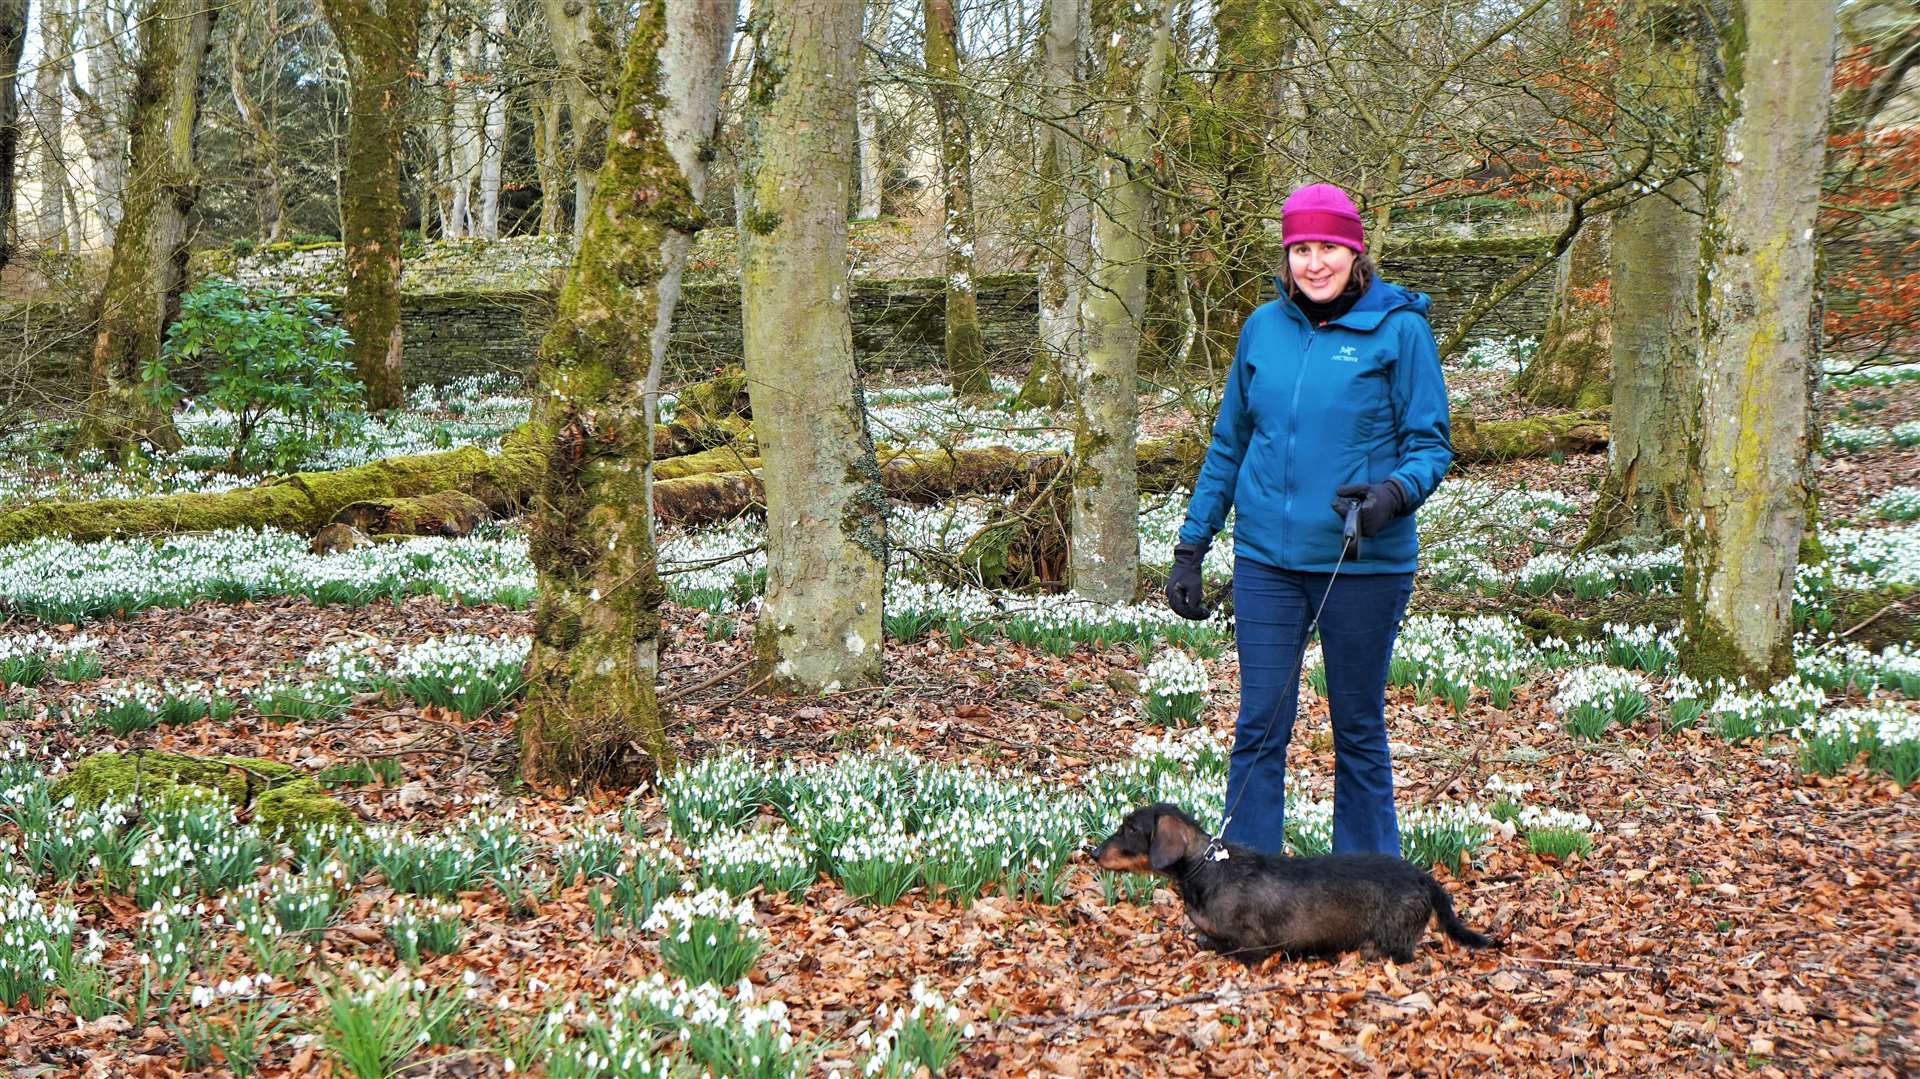 Estie Broughton from Dunnet took her wirehaired dachshund Lilly for a walk through the gardens. Picture: DGS